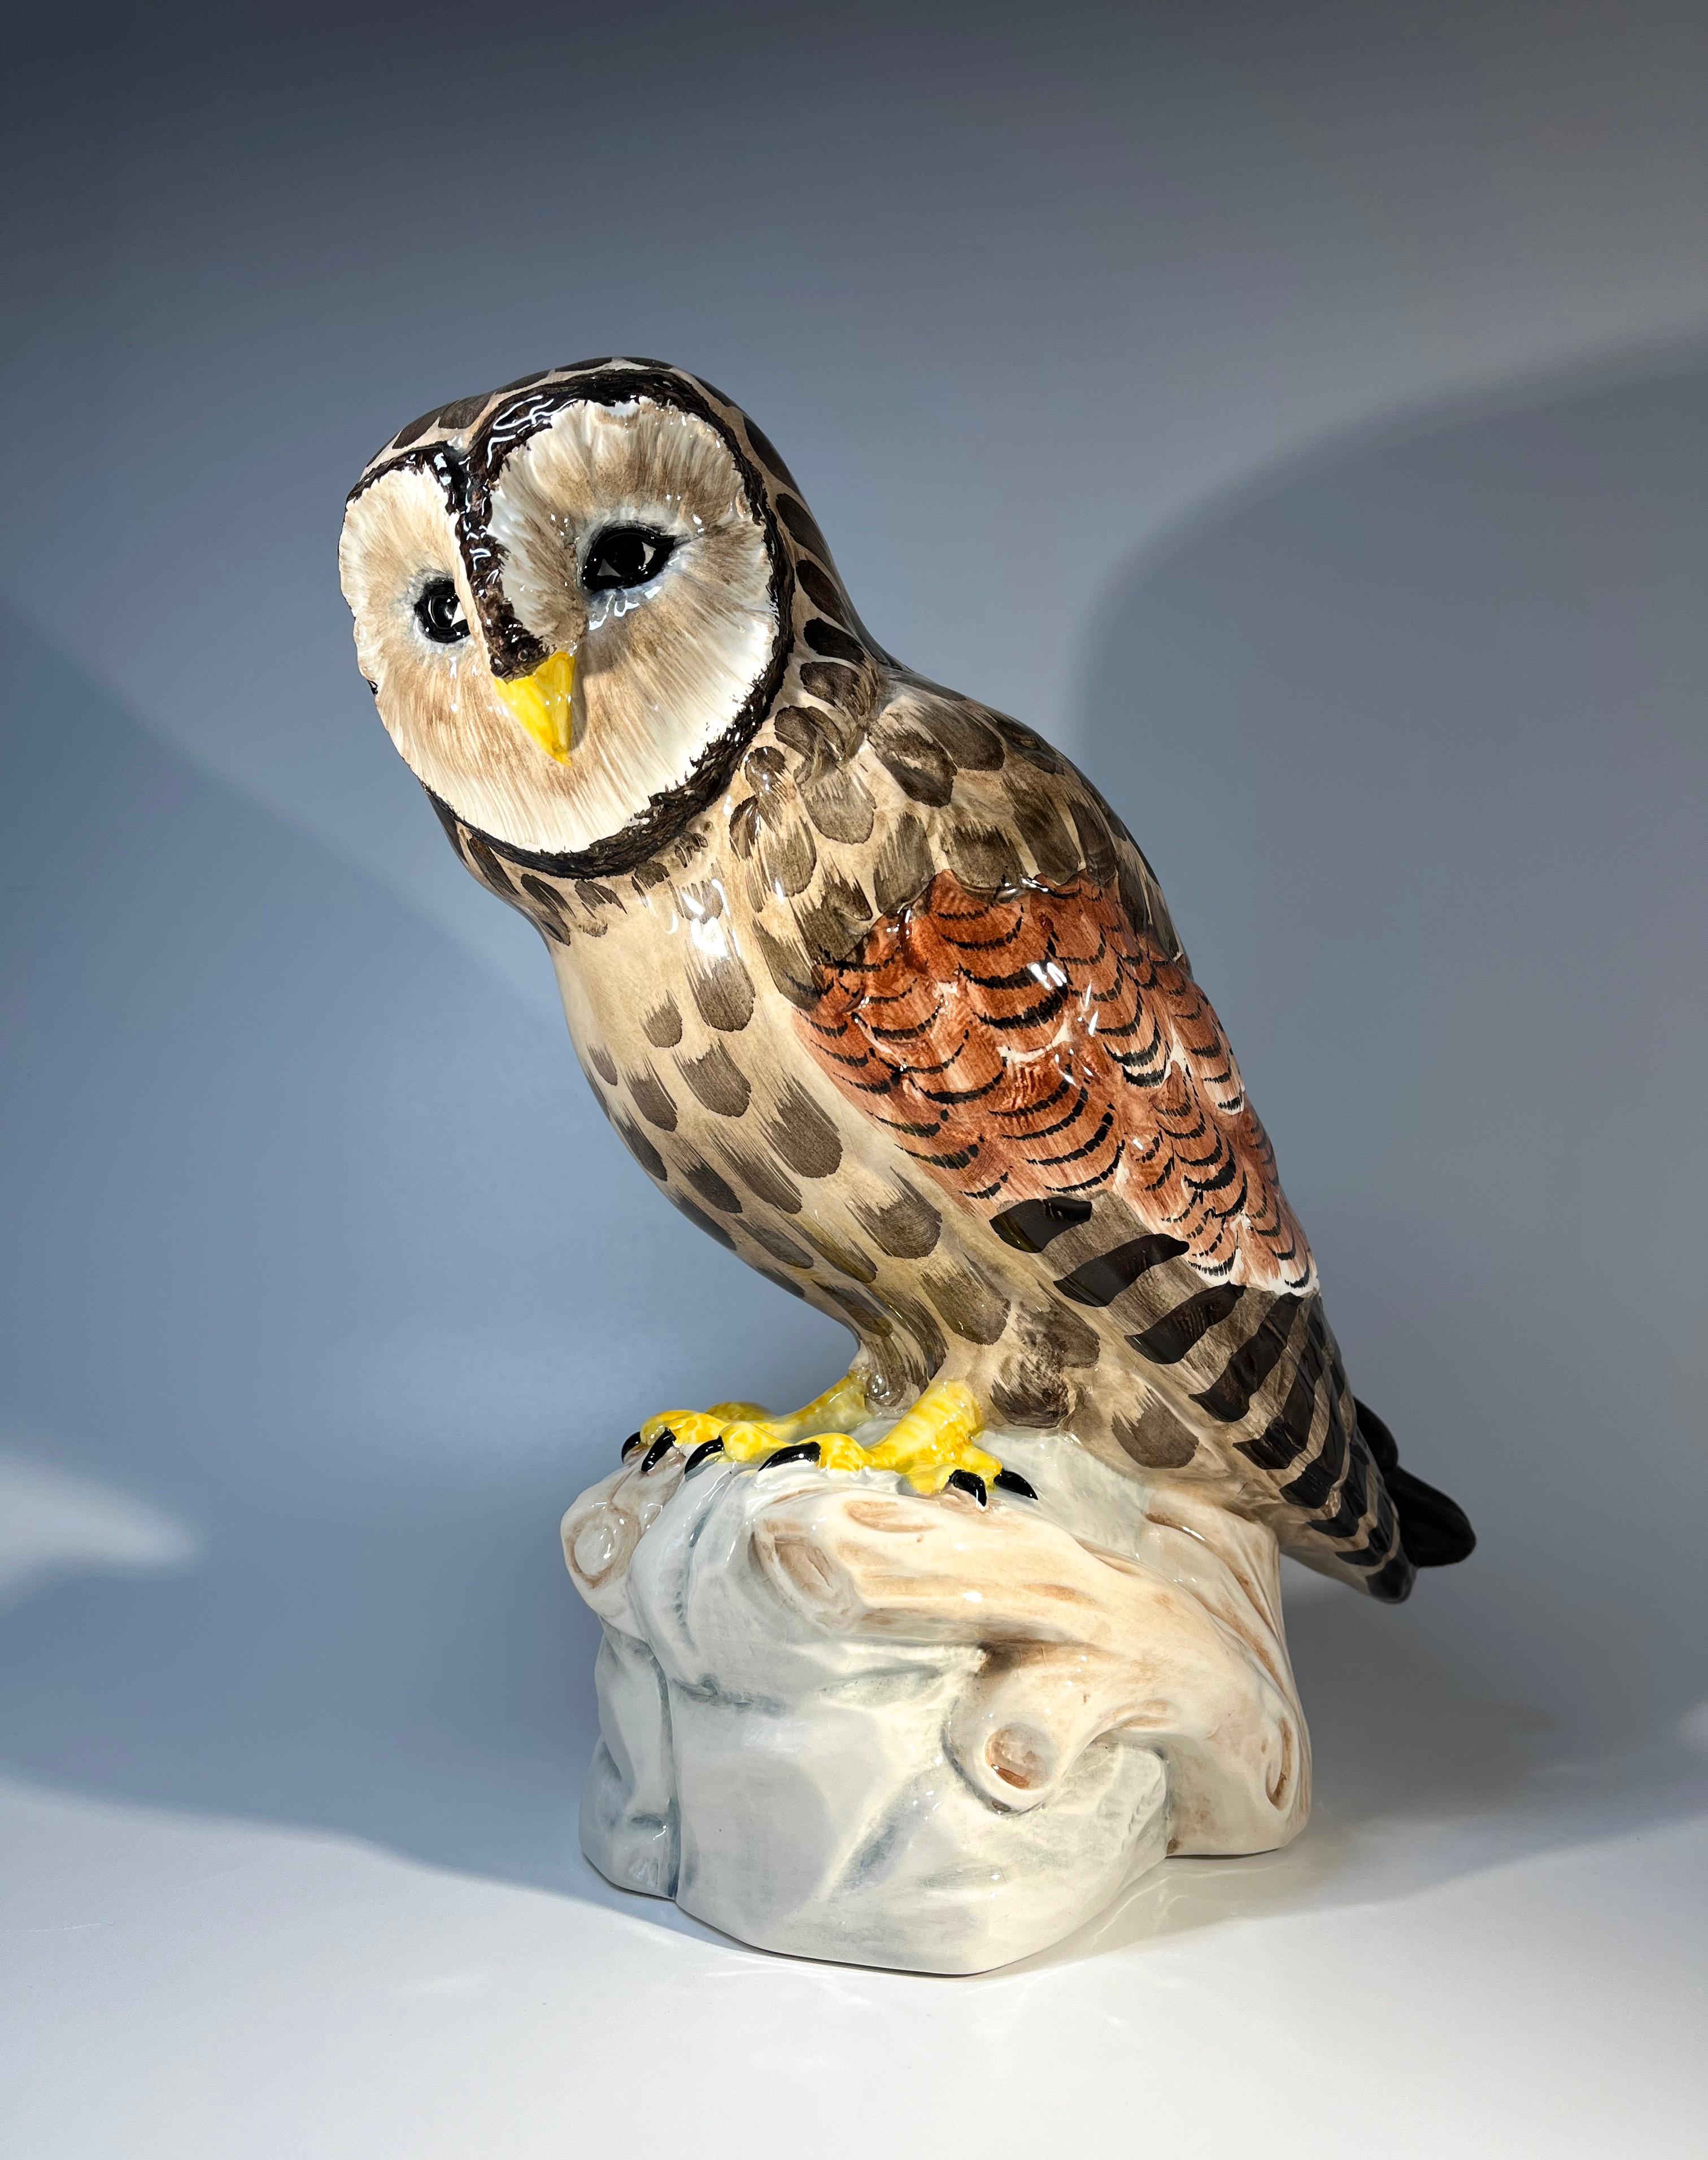 Impeccably hand painted life-size barn owl figure by Zanolli, Italy from the 1980's
Has incredible presence - a terrific piece
Circa 1980's
Signed Zanolli, Italy
Height 11.5 inch, Width 5.5 inch, Depth 9 inch
In excellent condition
Wear consistent